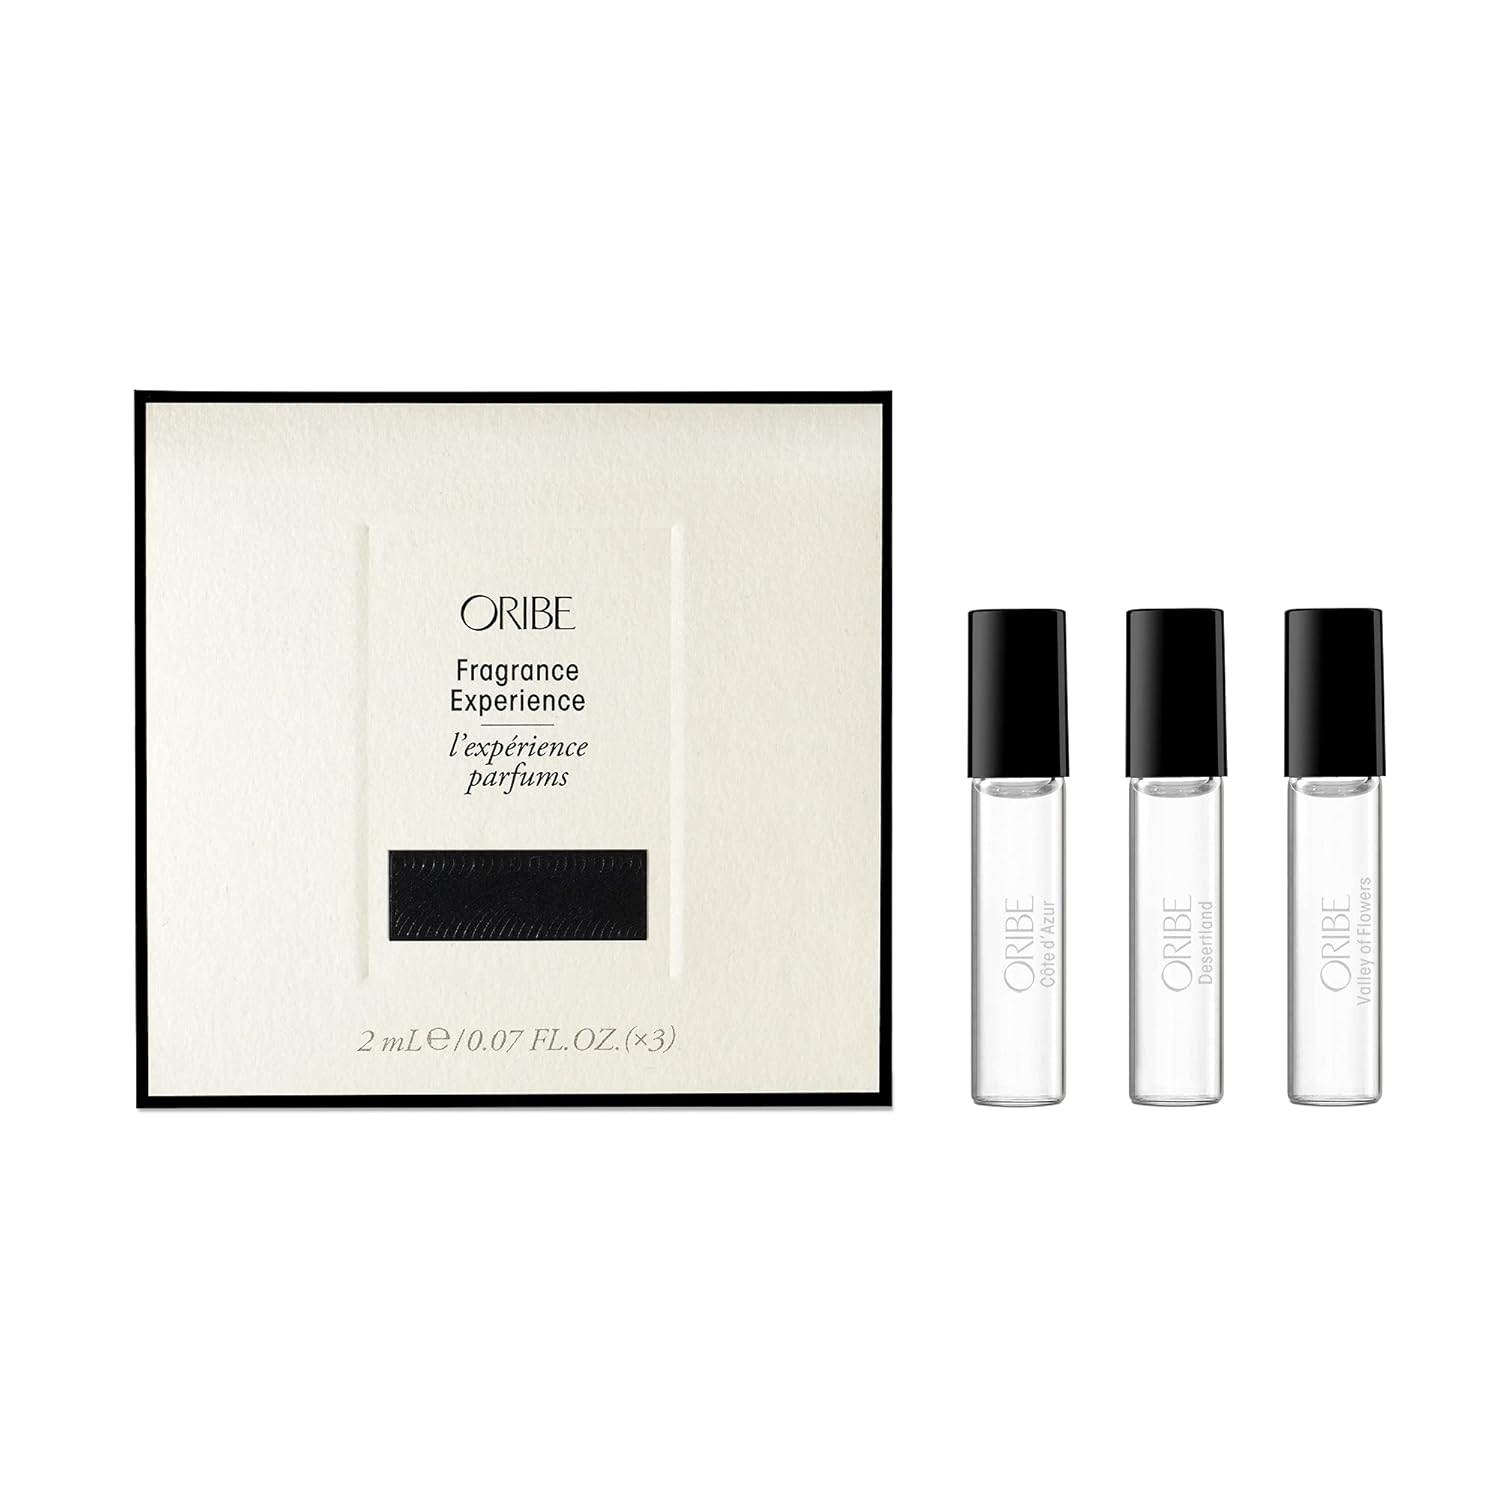 ORIBE Fragrance Discovery Set, 3 ct